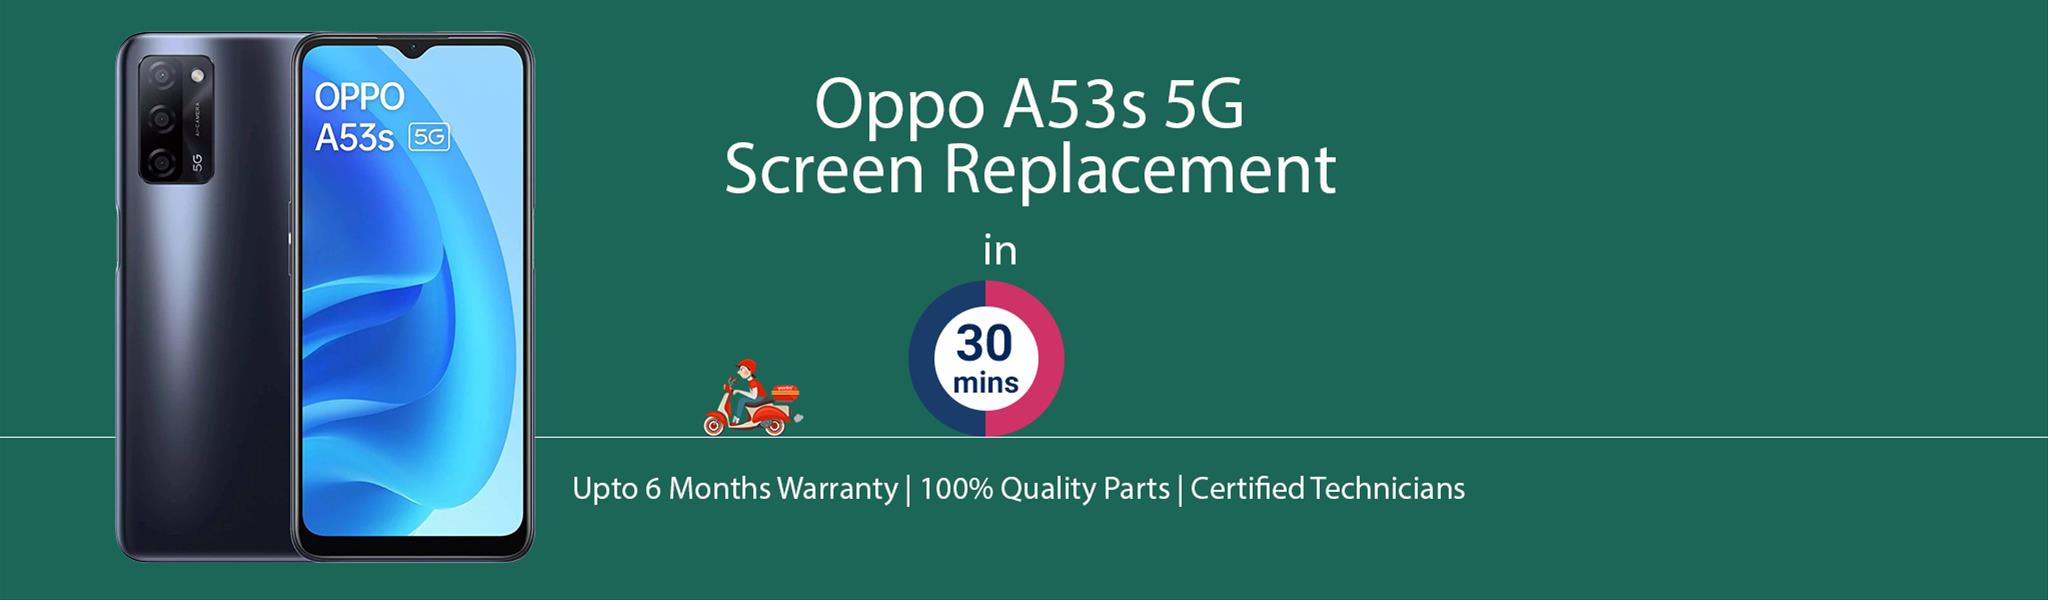 oppo-a53s-5g-screen-replacement.jpg